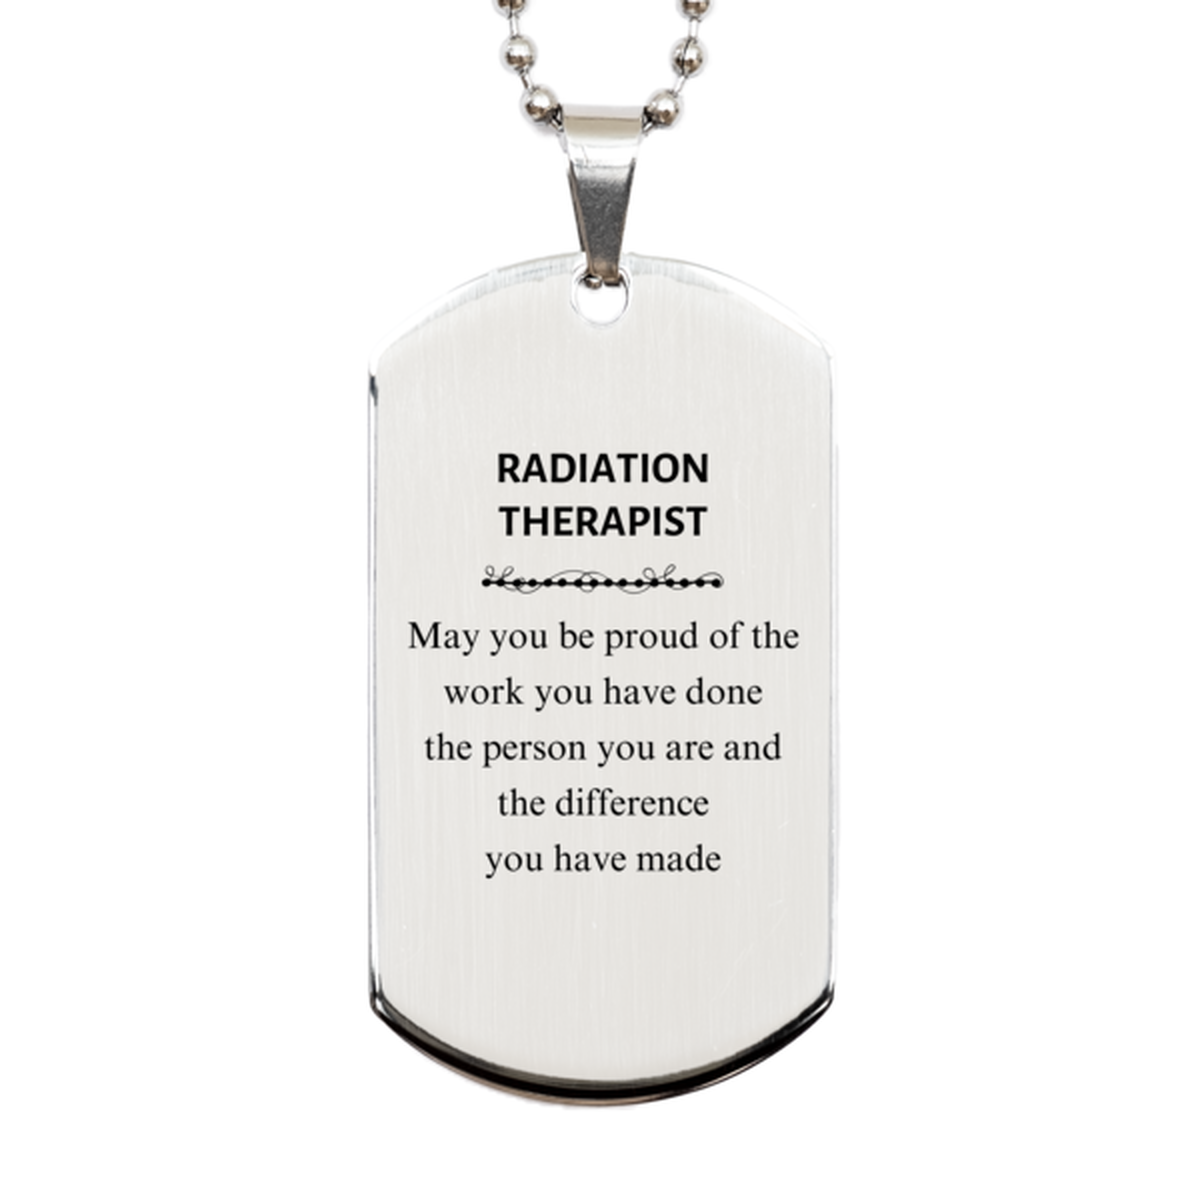 Radiation Therapist May you be proud of the work you have done, Retirement Radiation Therapist Silver Dog Tag for Colleague Appreciation Gifts Amazing for Radiation Therapist